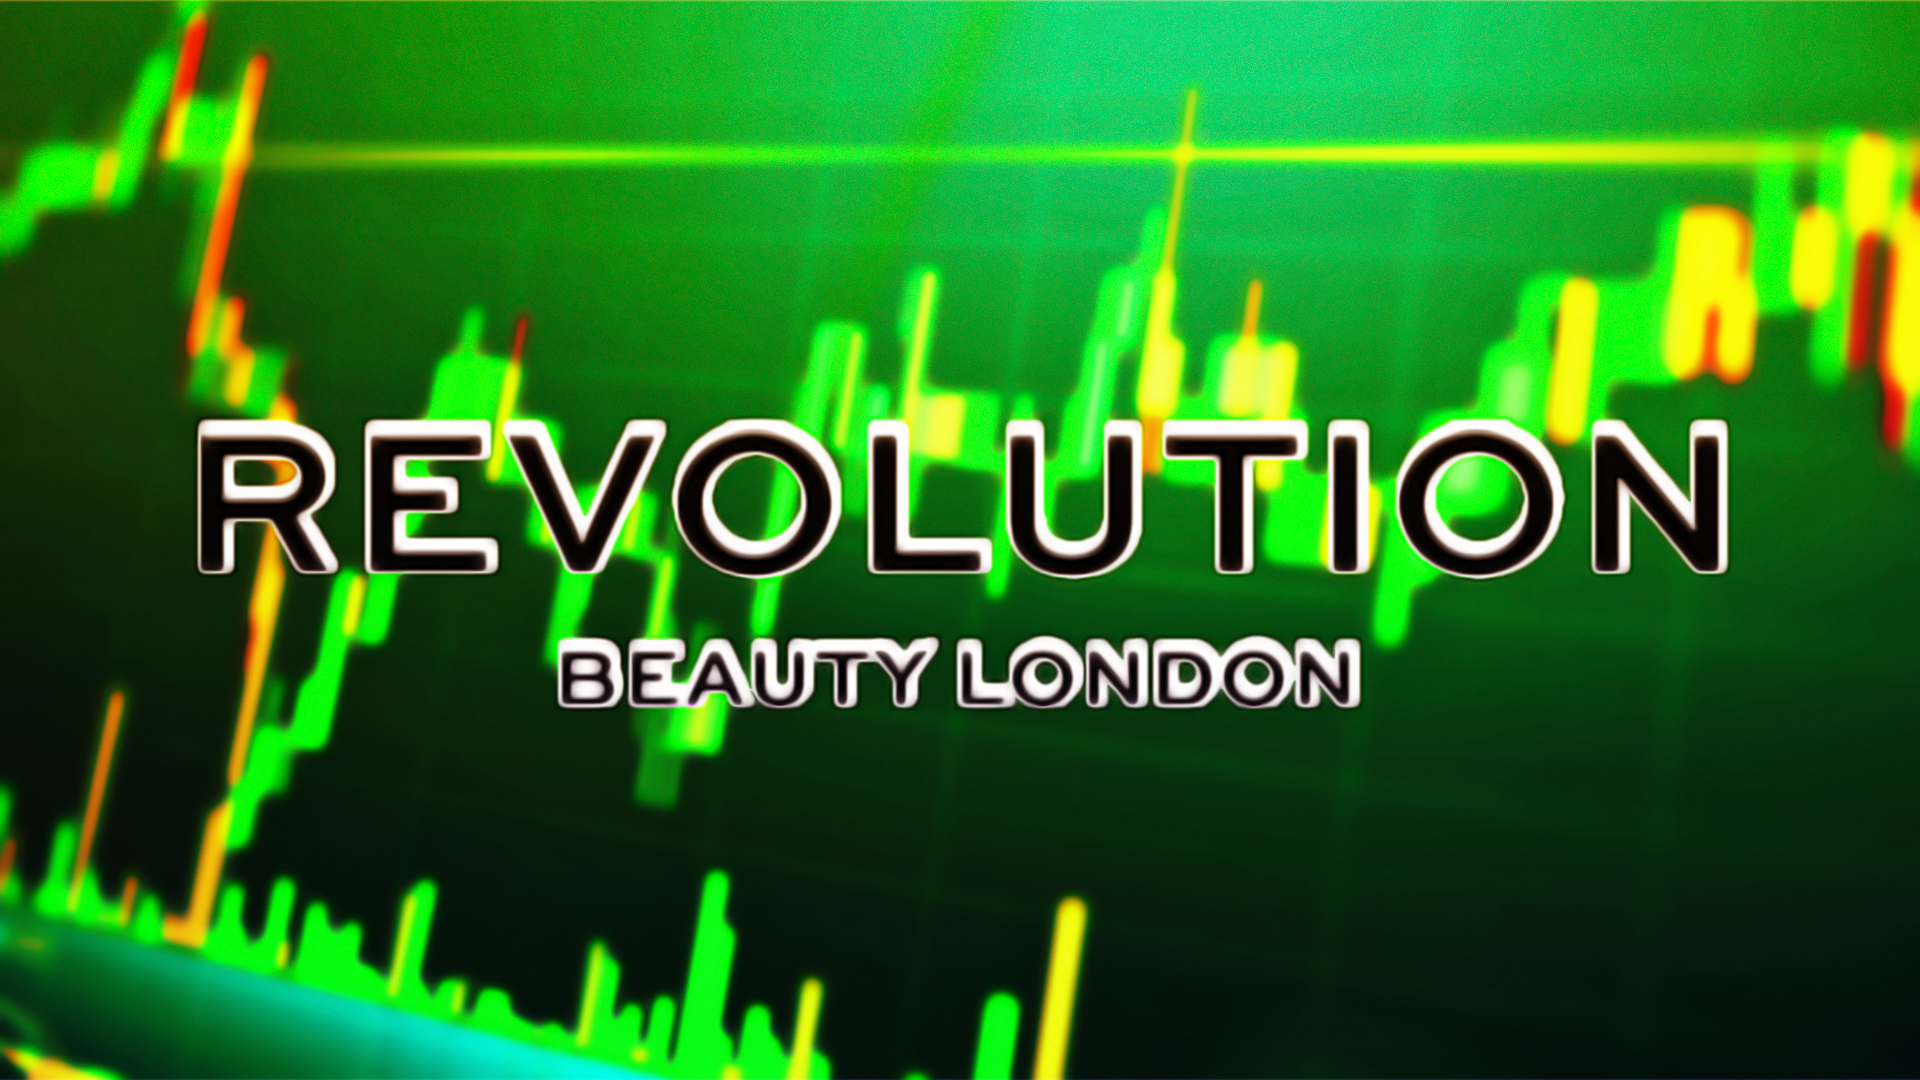 Will the long range bound movement lead to a big move? Revolution beauty stock analysis.